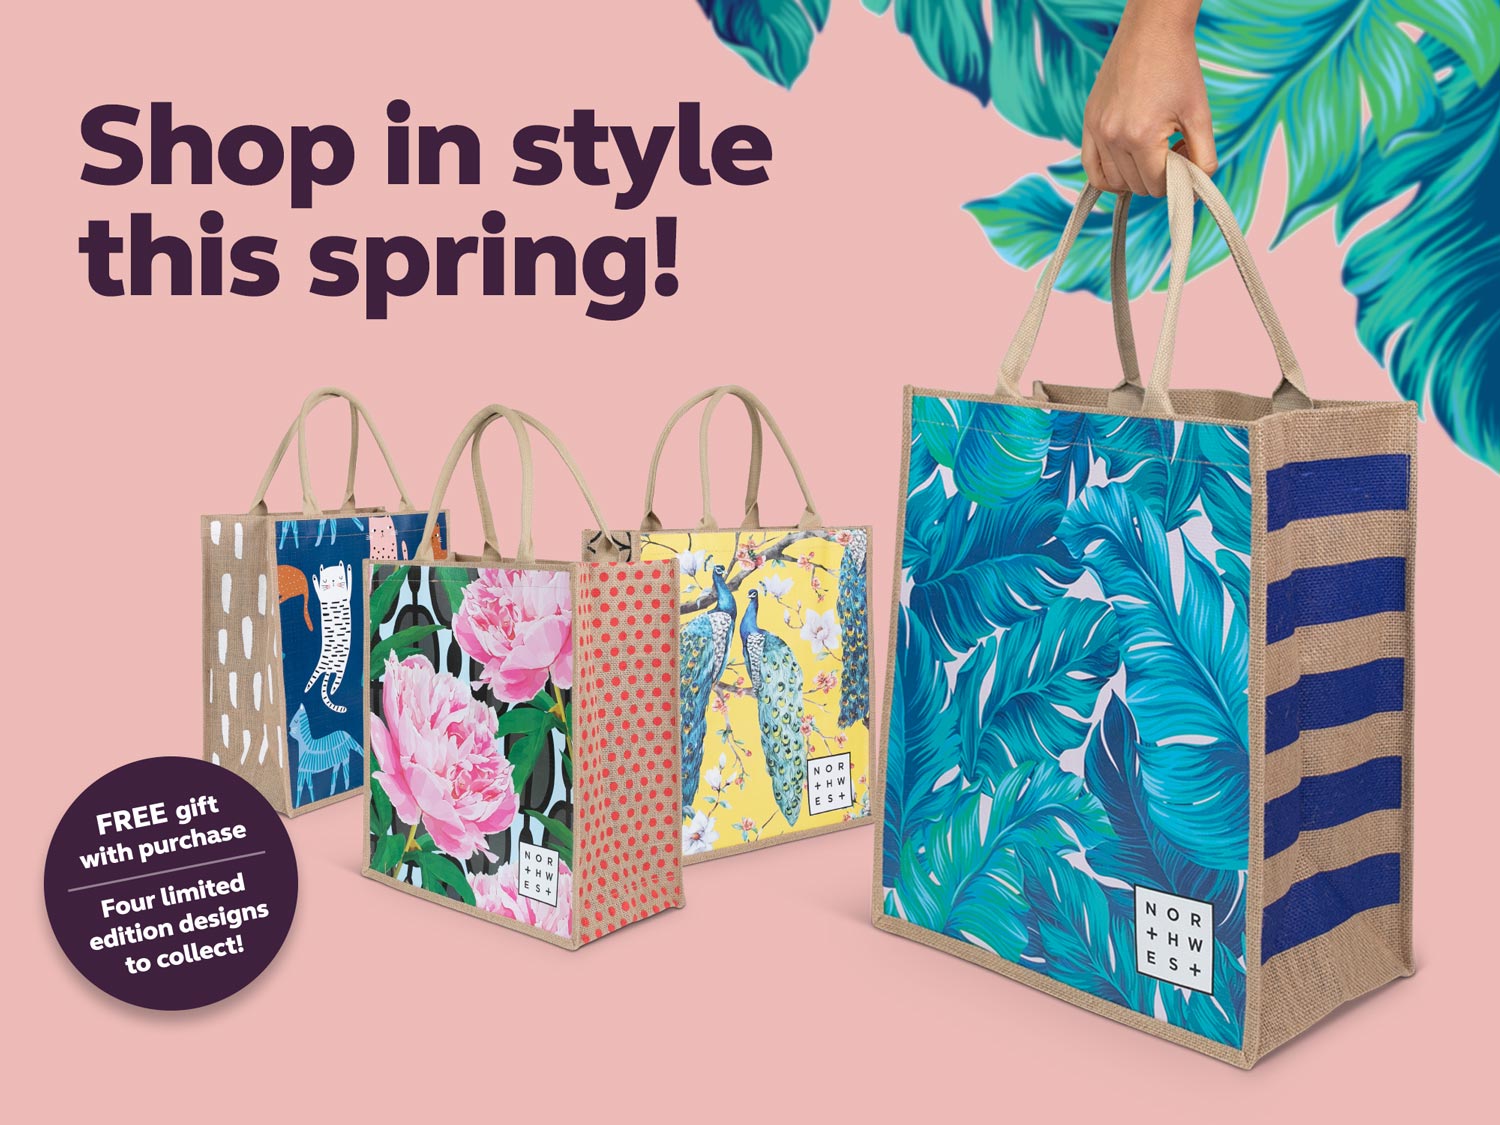 Shop in style this spring